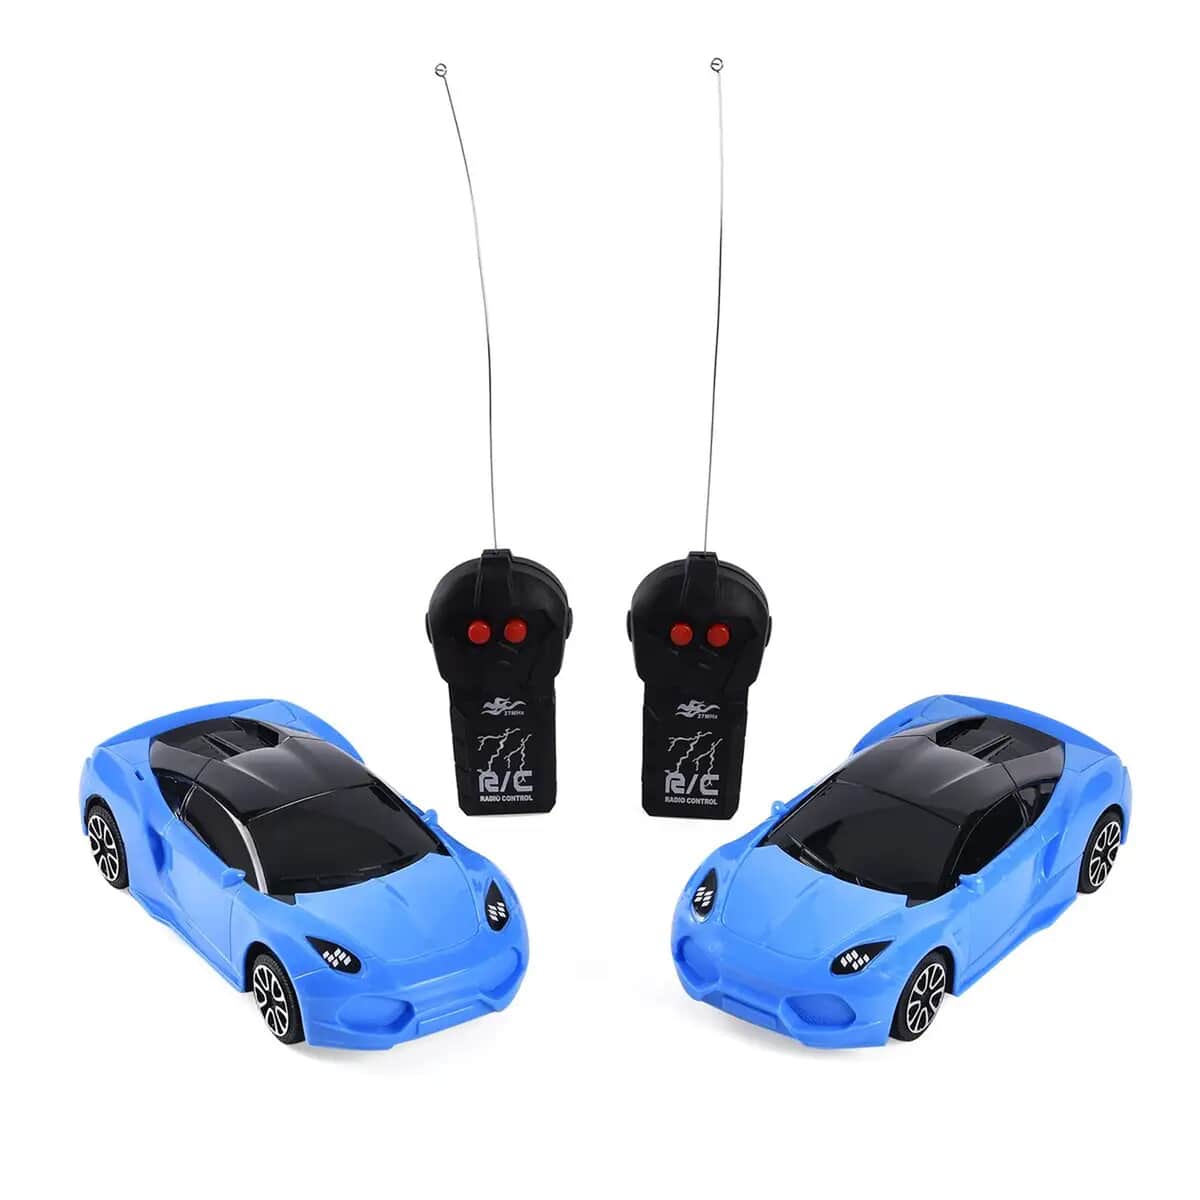 Blue 4 Channels RC Stunt Car with Lights and Remote Control, Kids Stunt Car Toy For Birthday Gift (3xAA for Car, 2xAA for Controller Battery Not Included) image number 0